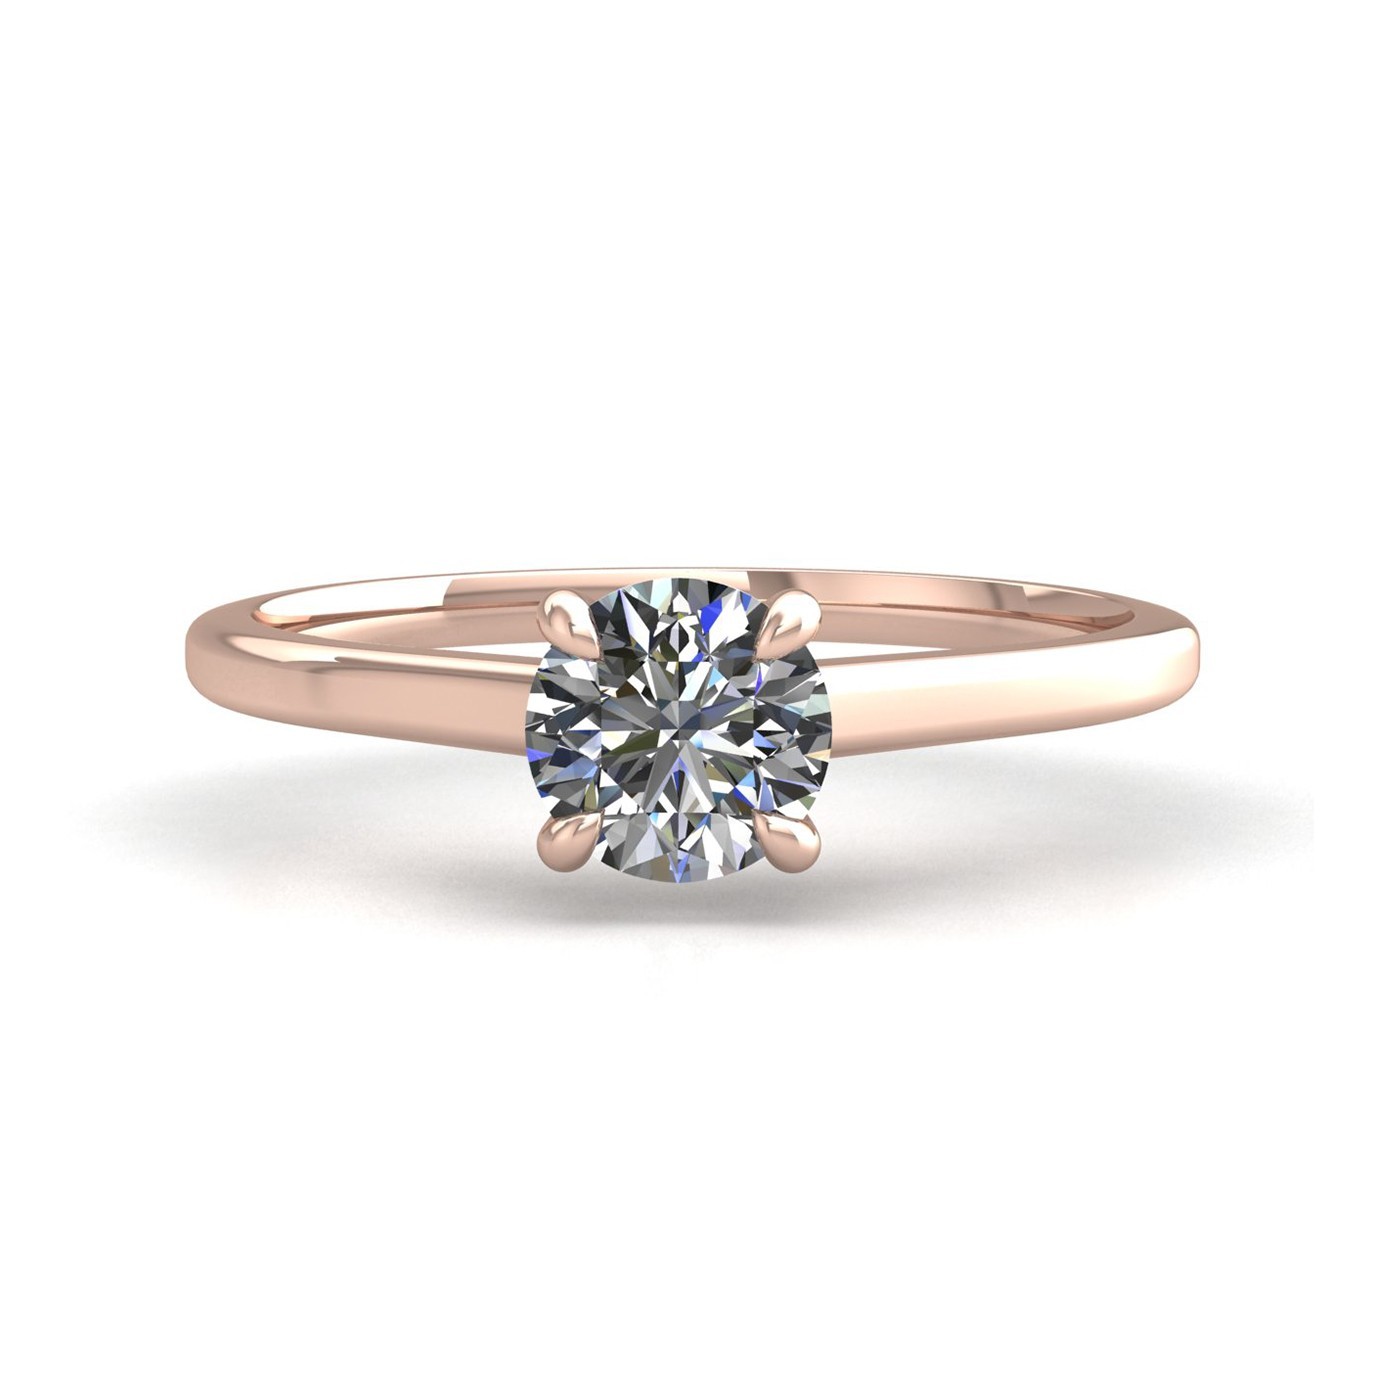 18k rose gold 1.0ct 4 prongs solitaire round cut diamond engagement ring with whisper thin band Photos & images